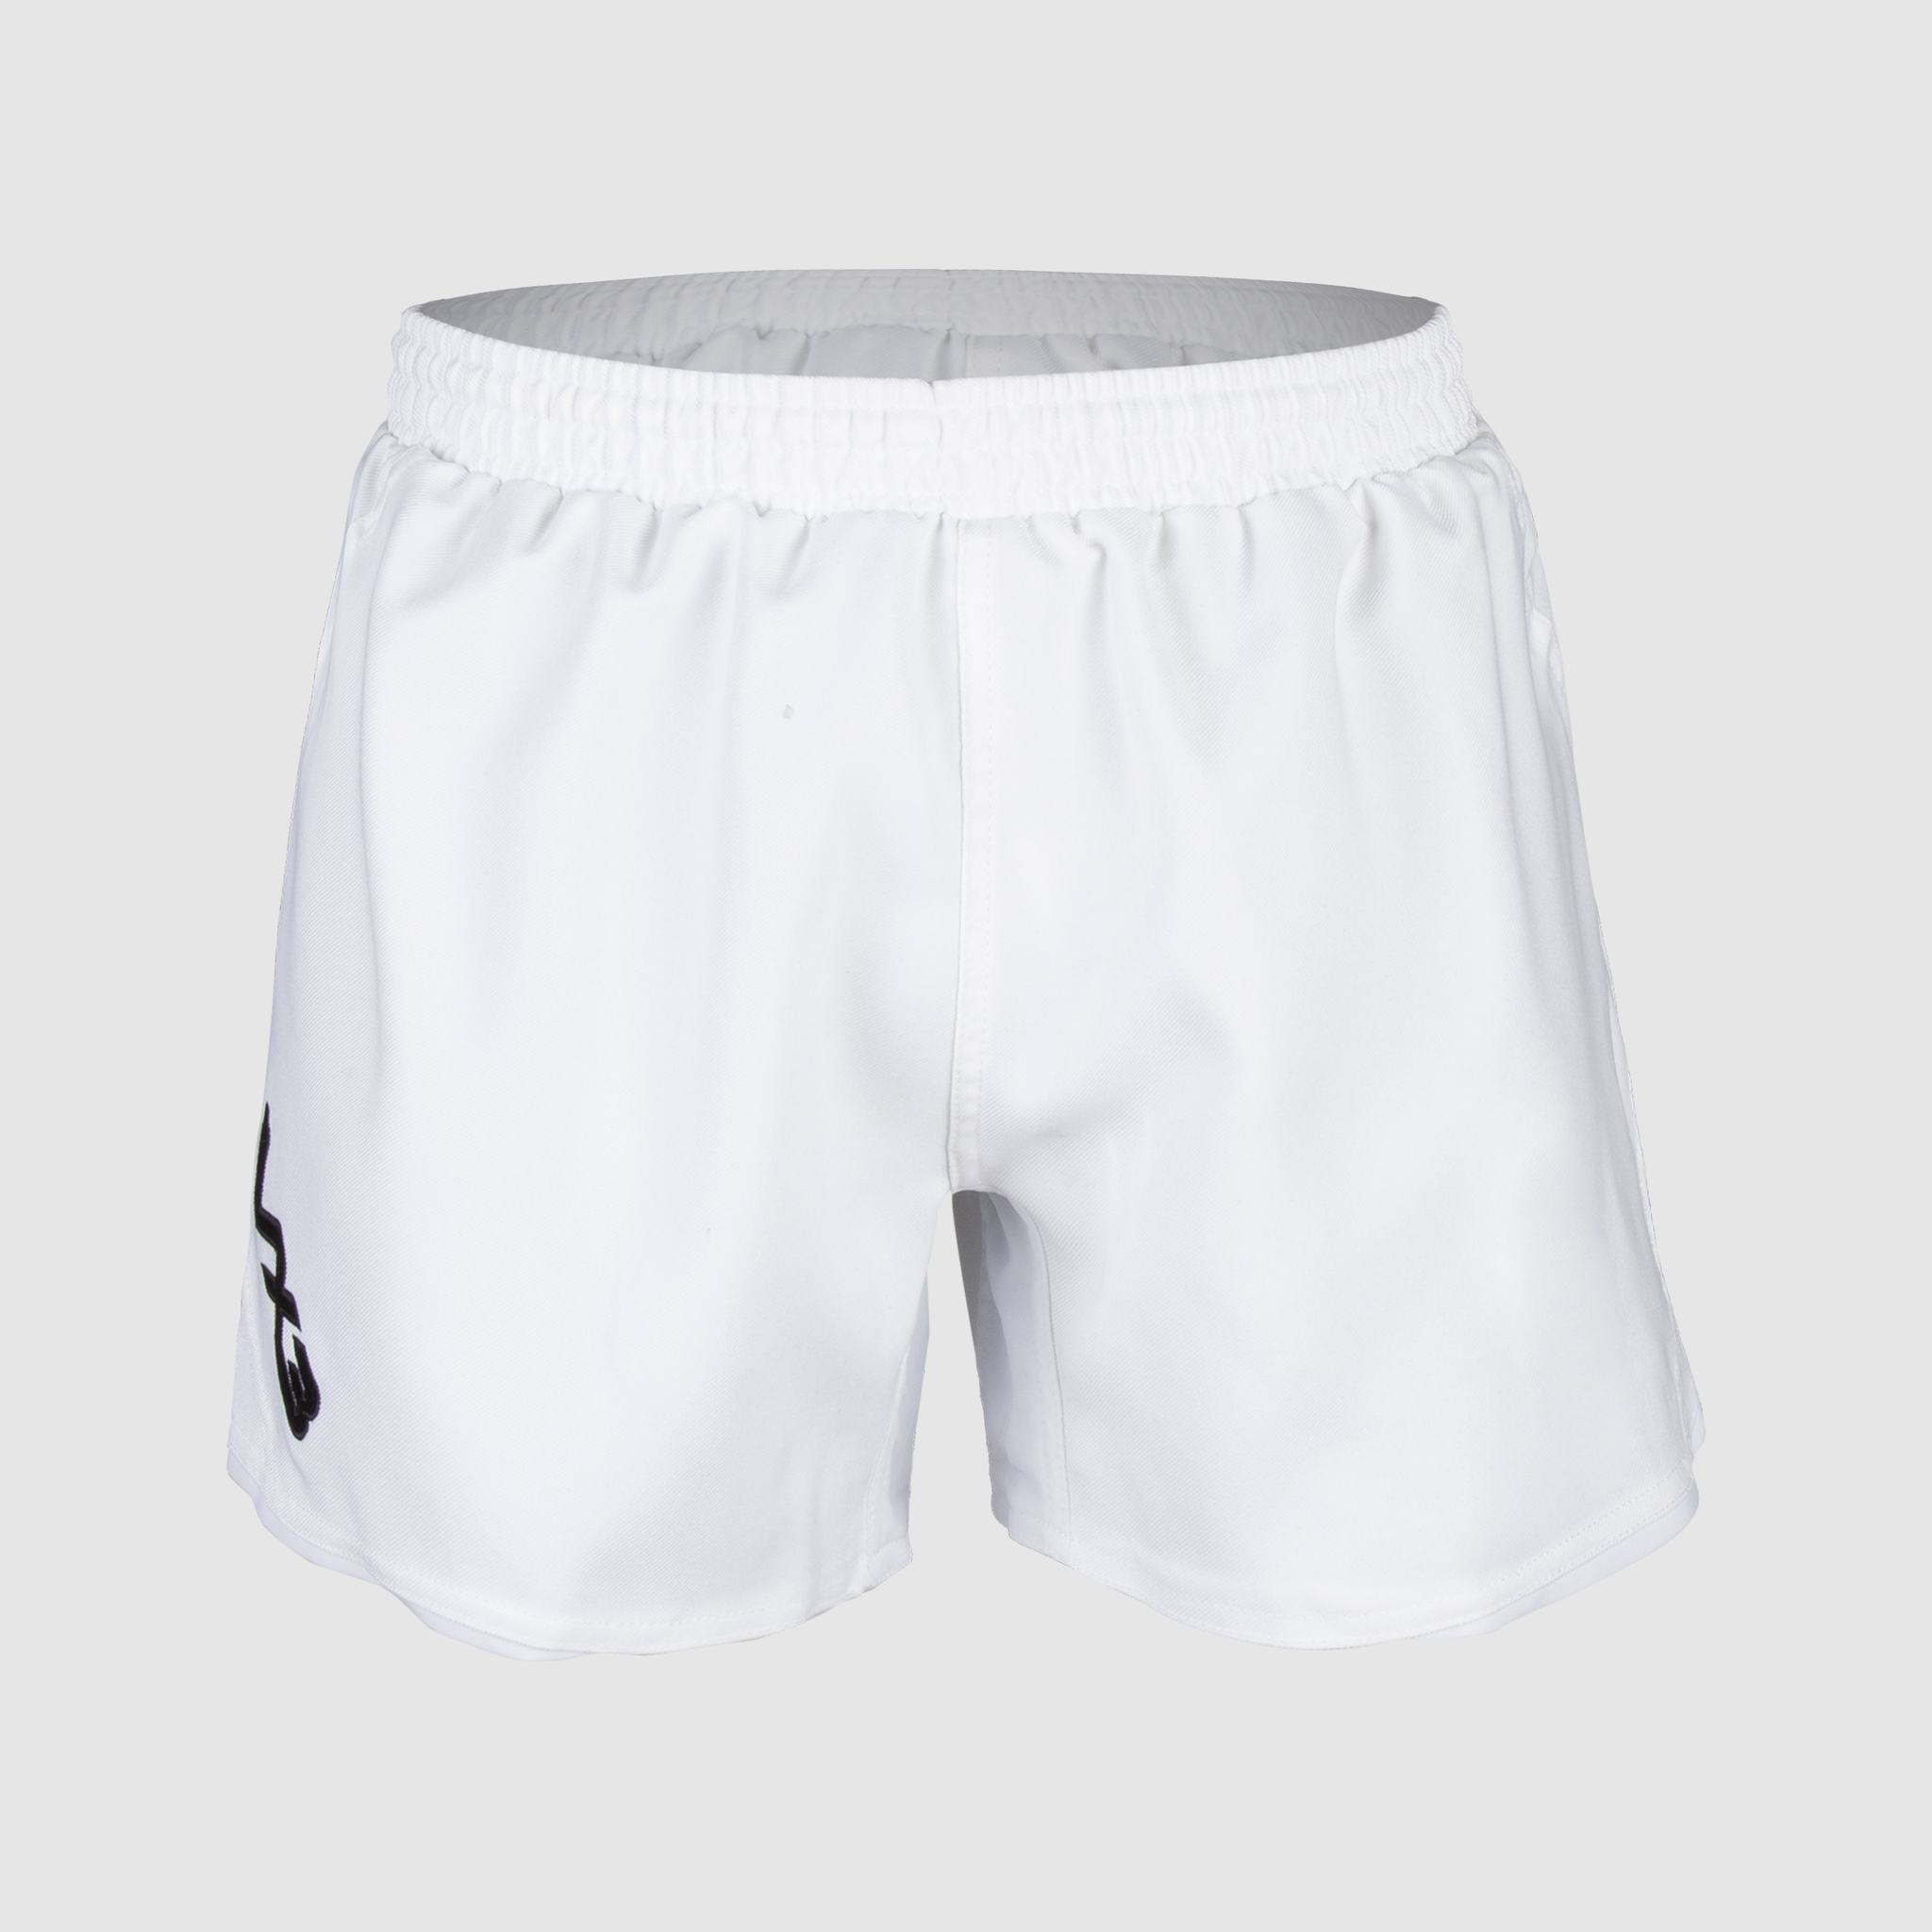 Prima Youth Rugby Shorts White